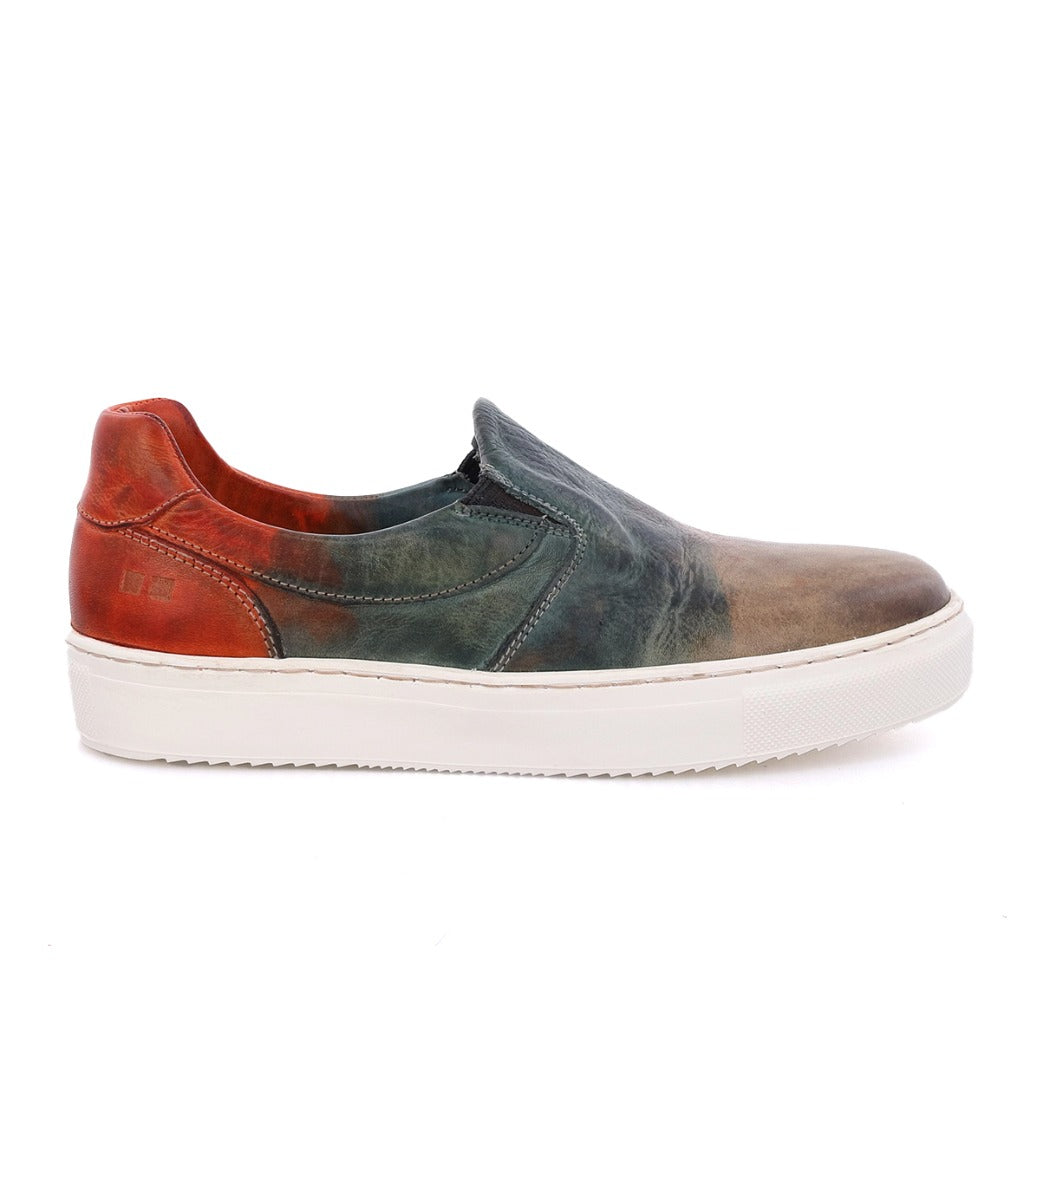 A pair of women's slip on sneakers with a multi-color dye, called Hermione from the brand Bed Stu.